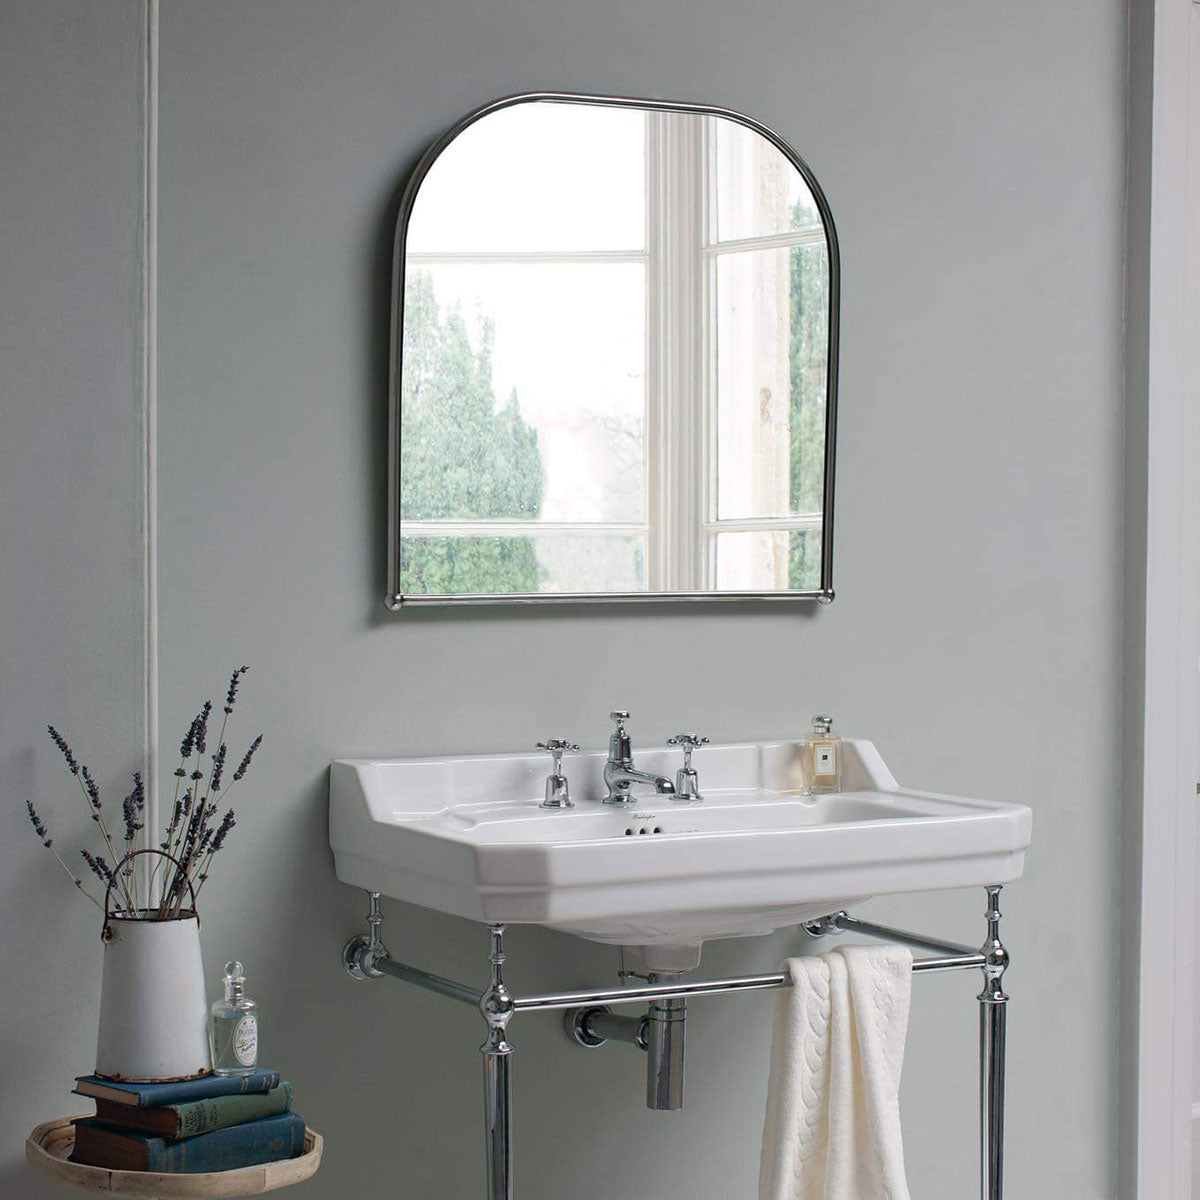 Burlington Arched Mirror with Chrome Frame Feature Deluxe Bathrooms UK